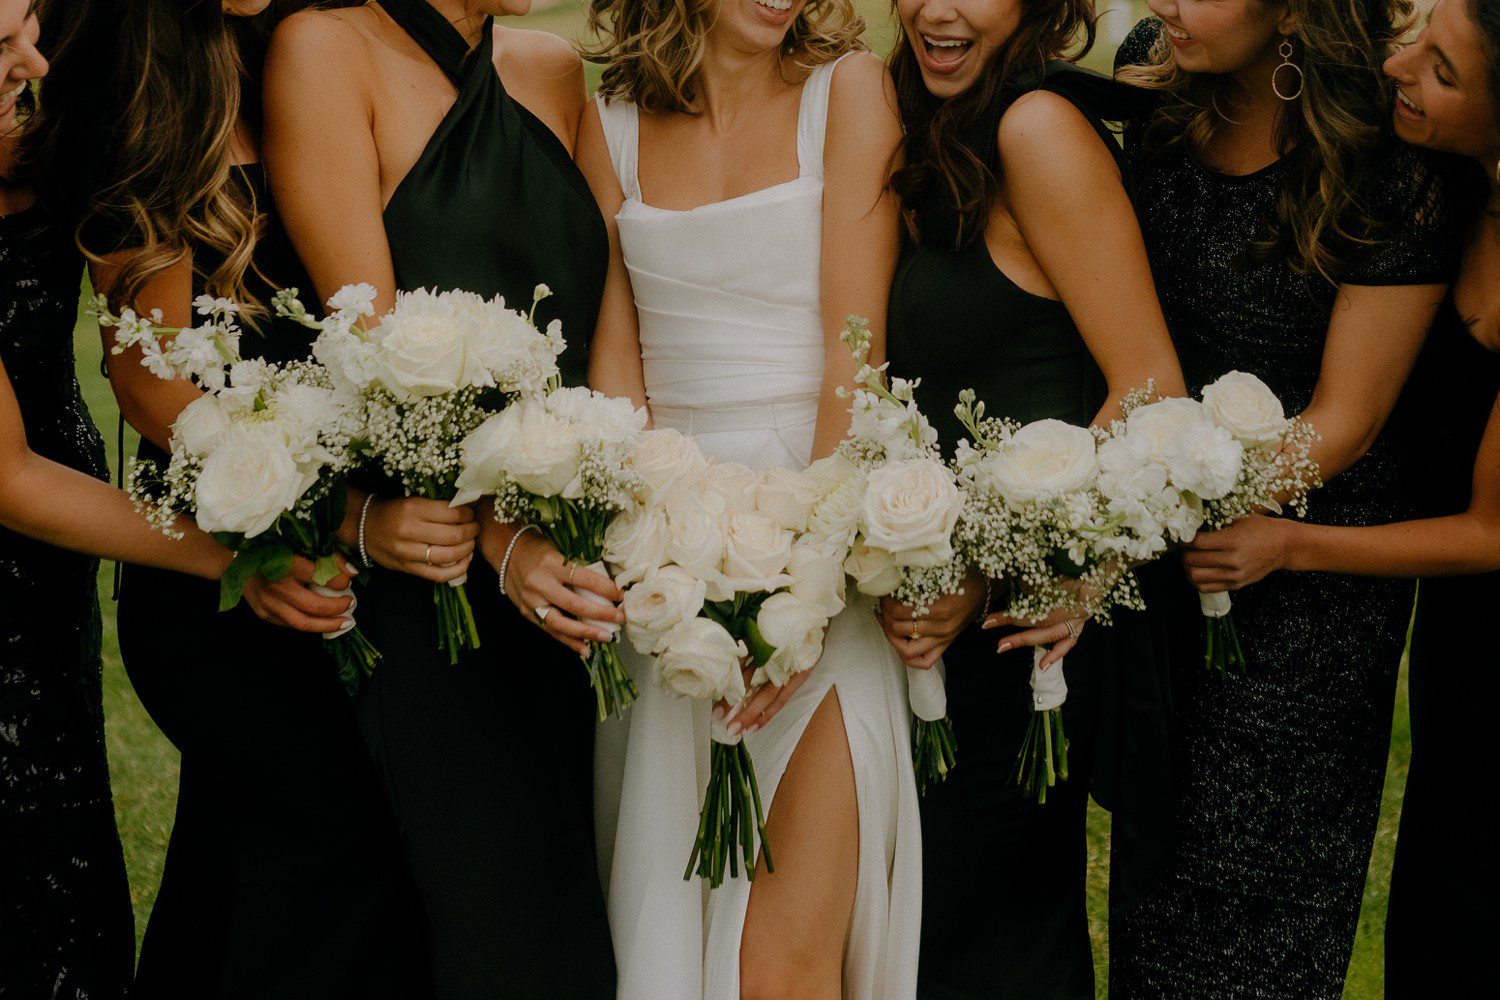 Black bridesmaid dresses with white bouquets. 